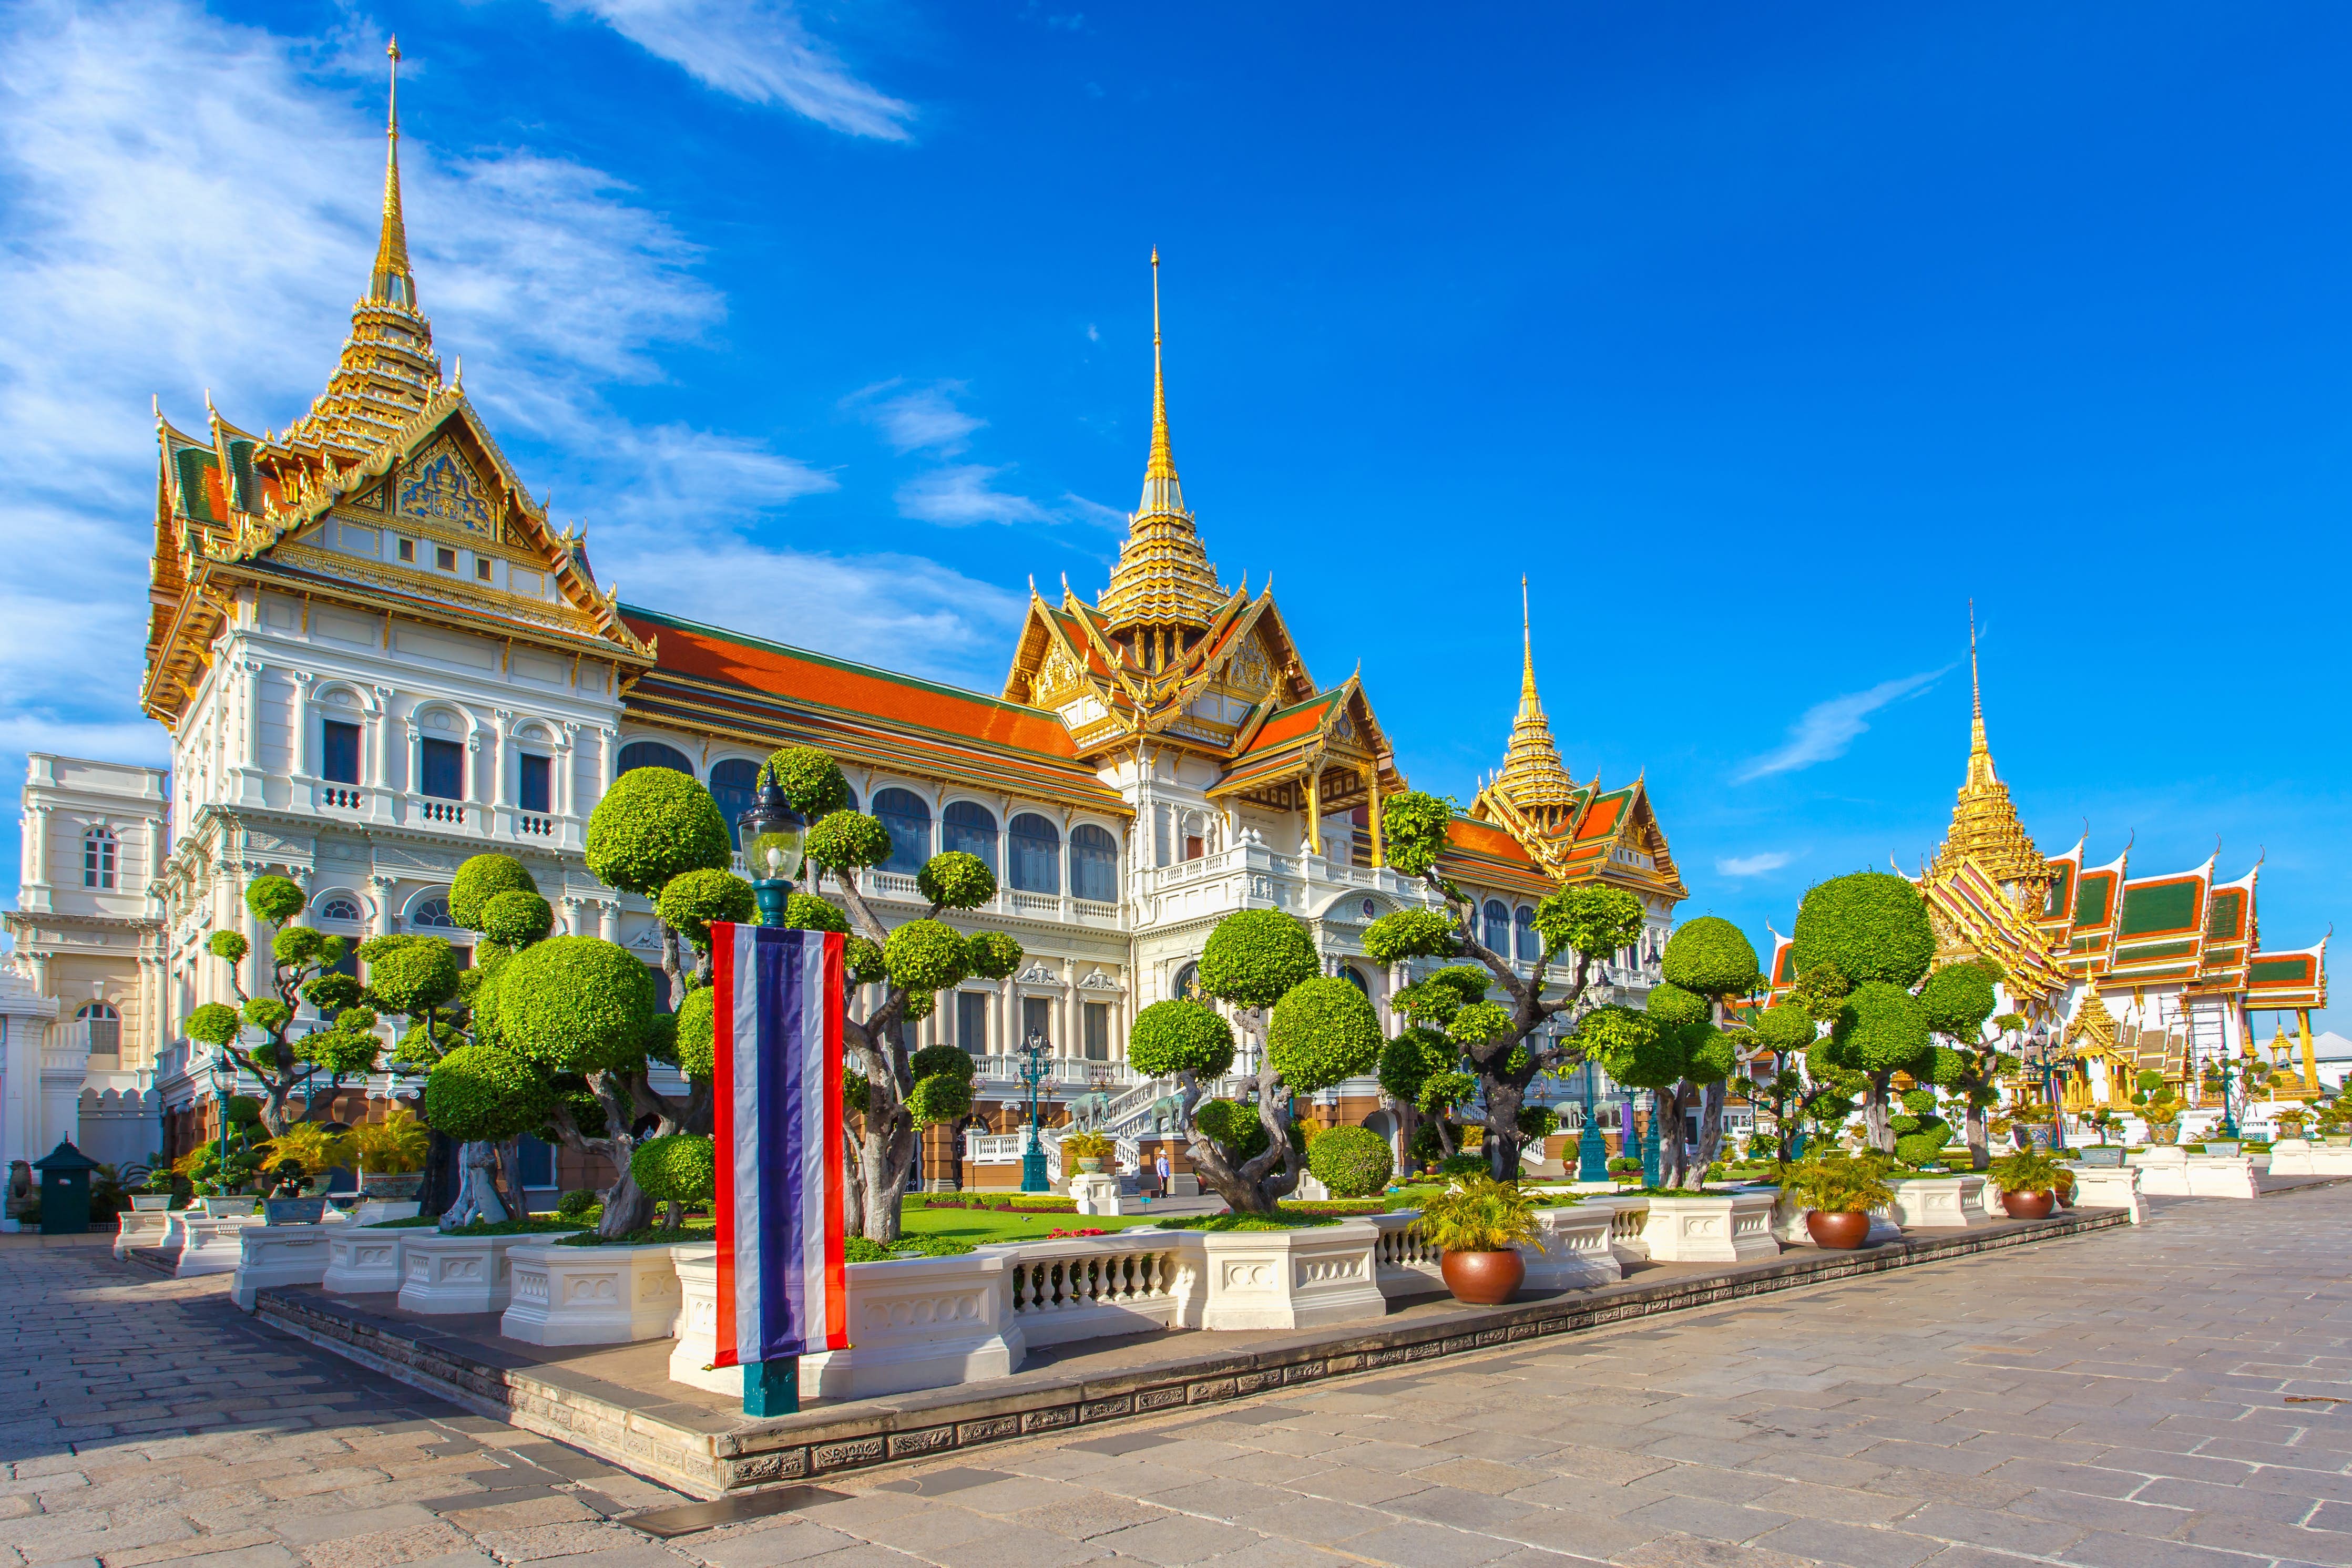 Discover The Royal Grand palace and the most famous sightseeing sites